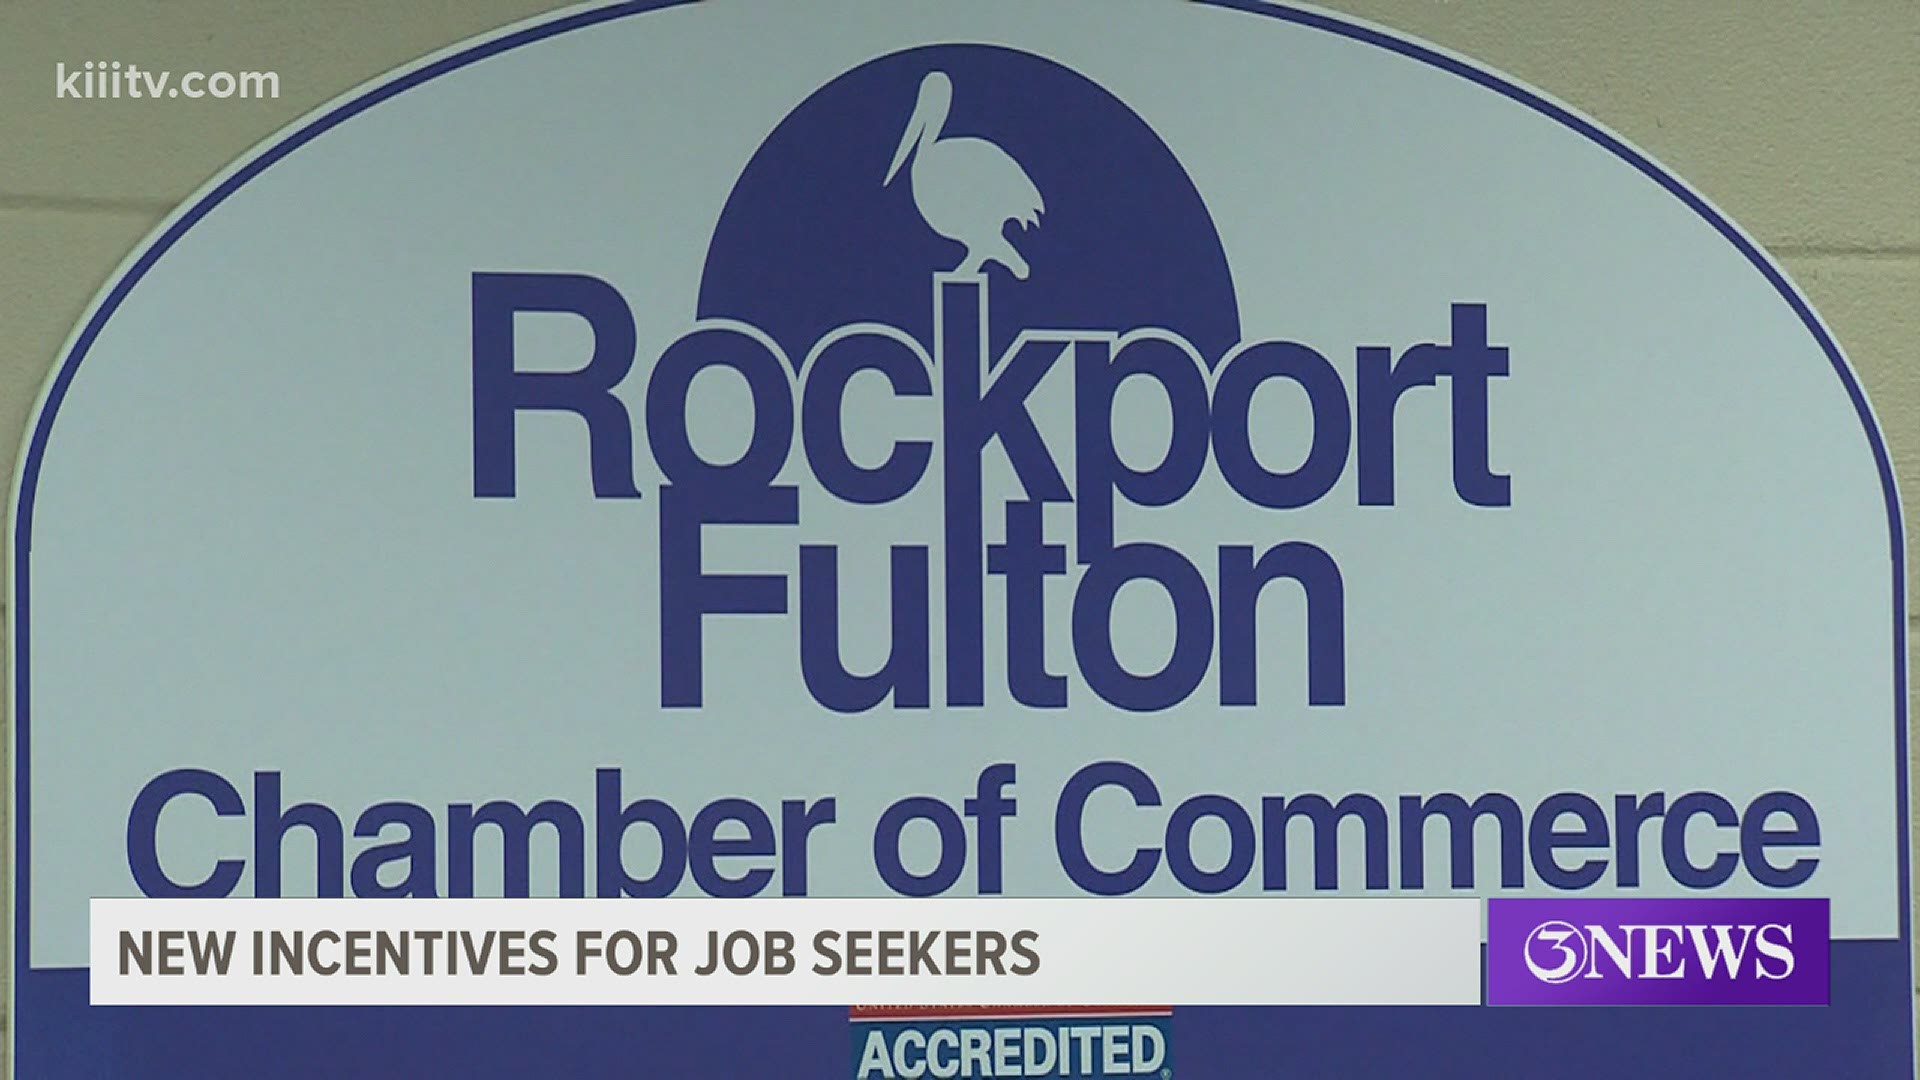 The Rockport Fulton Chamber will host a virtual job fair on May 13 from 3 p.m. - 6 p.m.